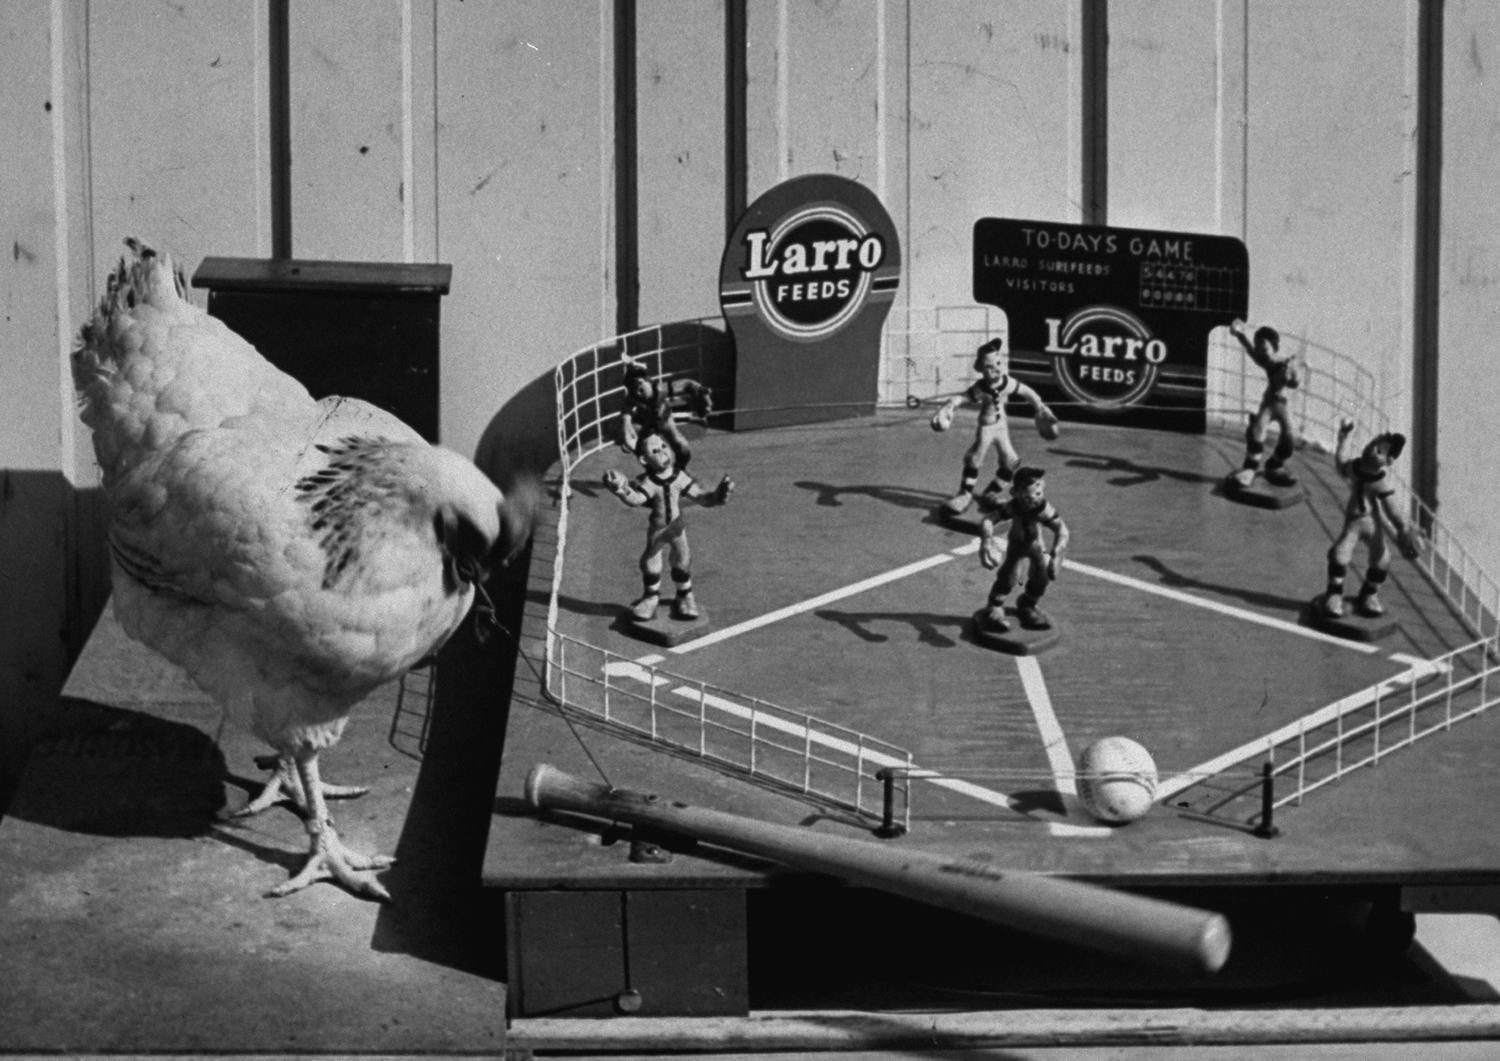 A chicken plays a game of baseball for food, 1953.